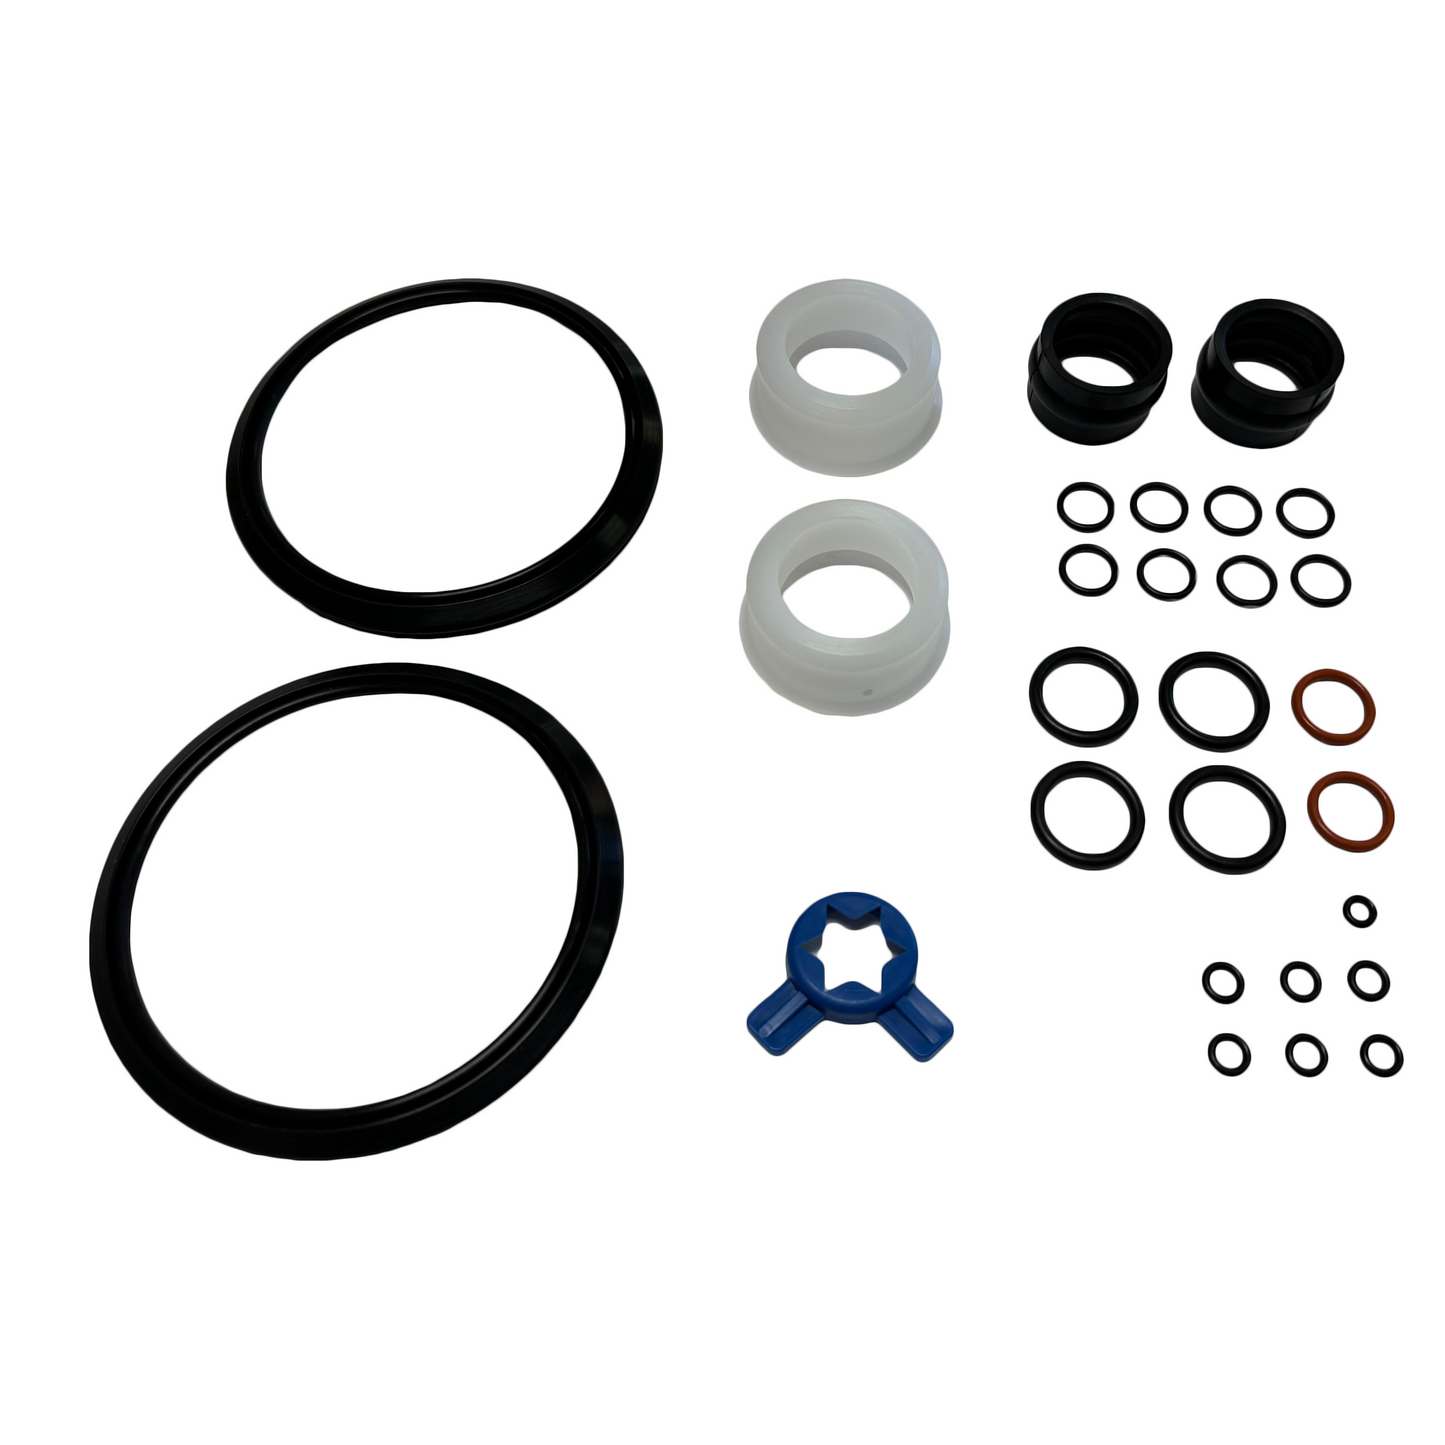 Taylor X69492 Tune Up Kit | Chick-fil-A | Exact Fit Replacement